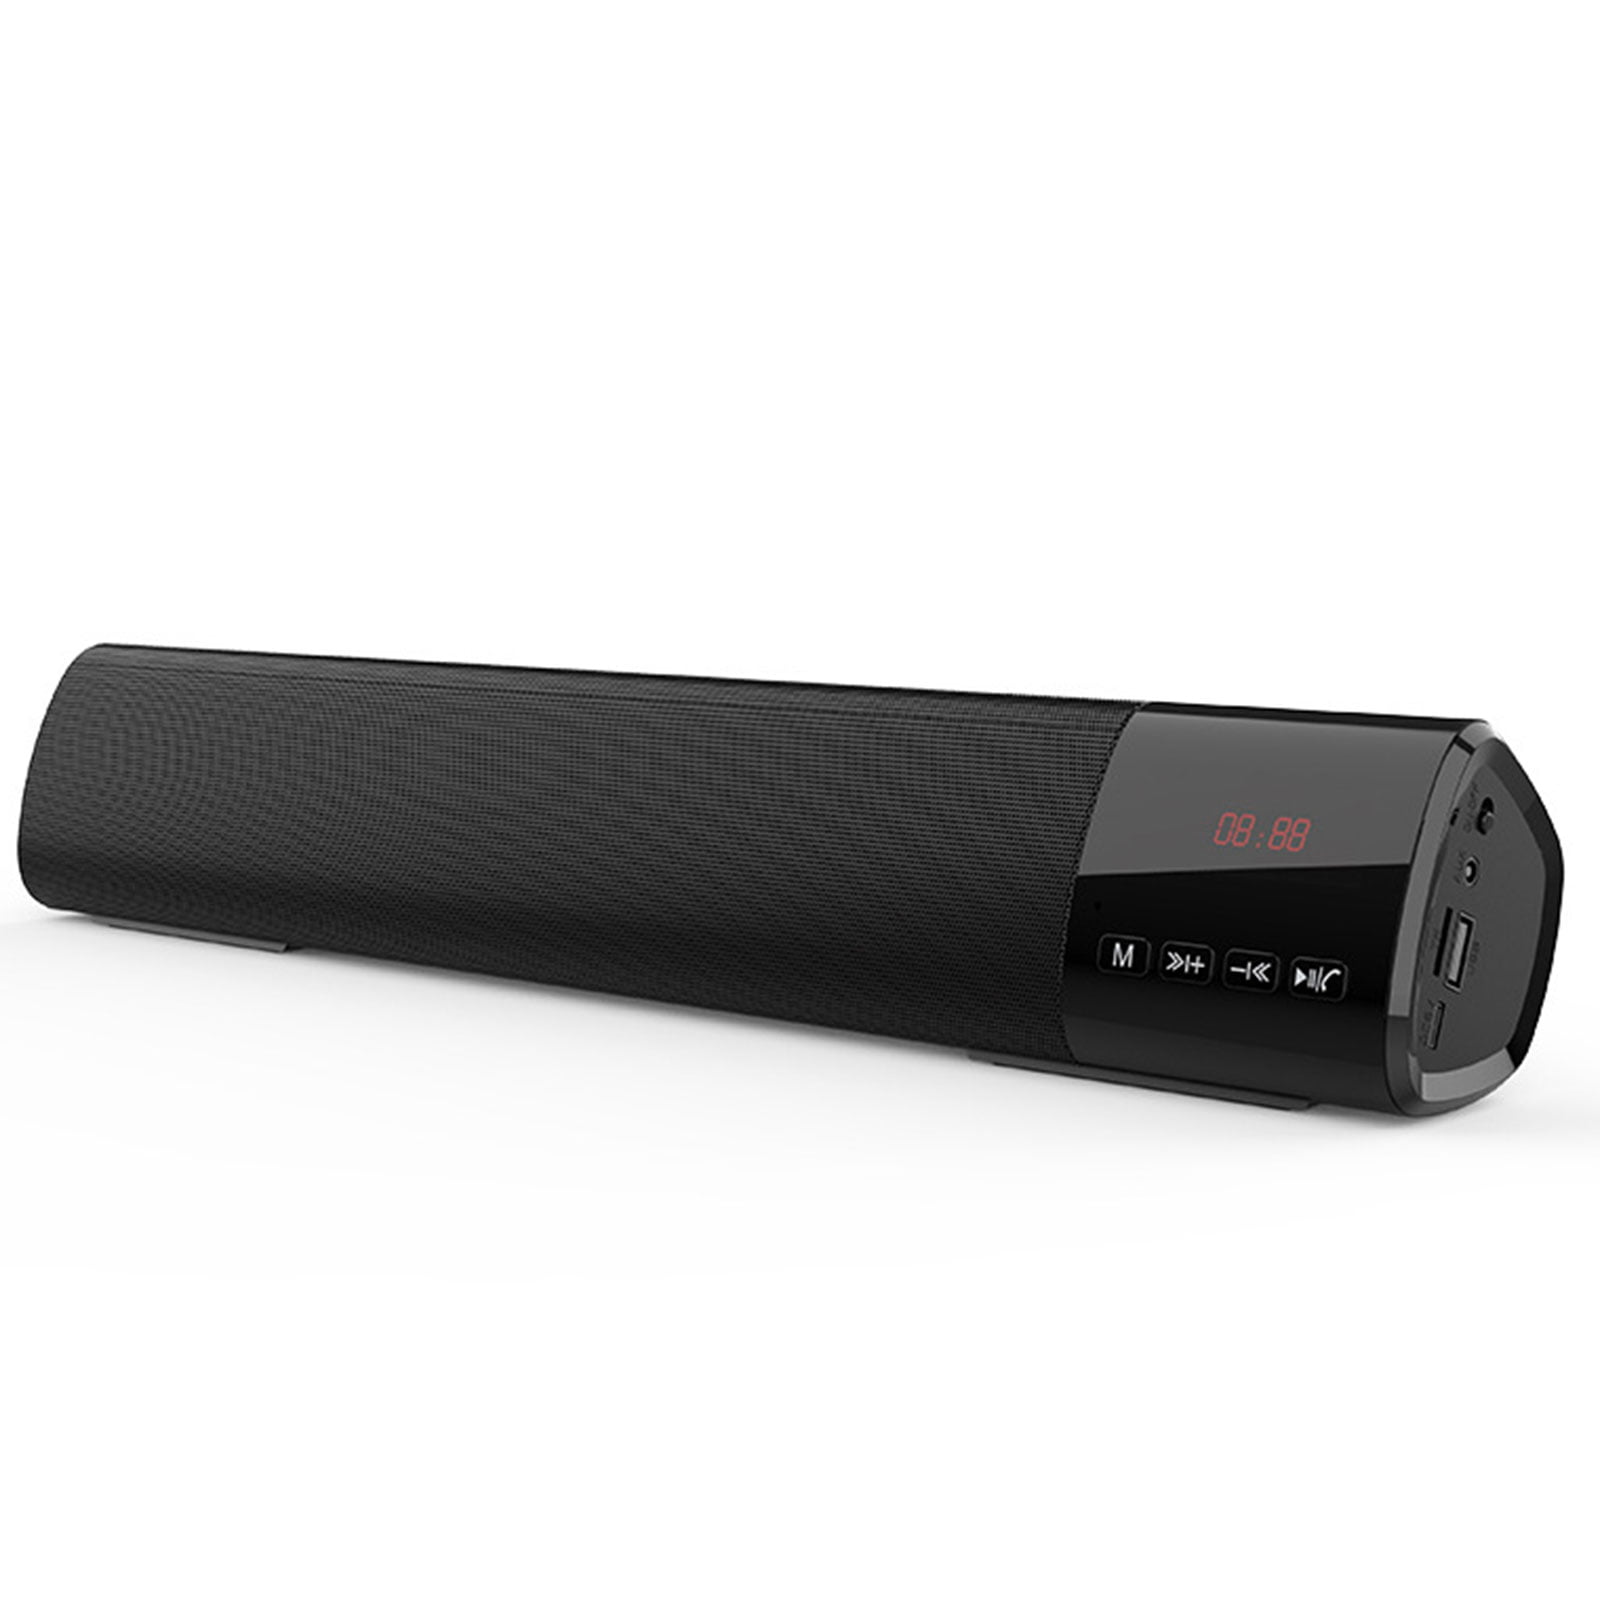 Sound Bar, Sound Bar for TV PC, Soundbar with Subwoofer, Wired &amp; Wireless Bluetooth 5.0 Speaker, RCA/Aux/USB Input, Surround Sound Home Theater Audio Soundbar for Phones/Tablet, with Remote Control - Walmart.com